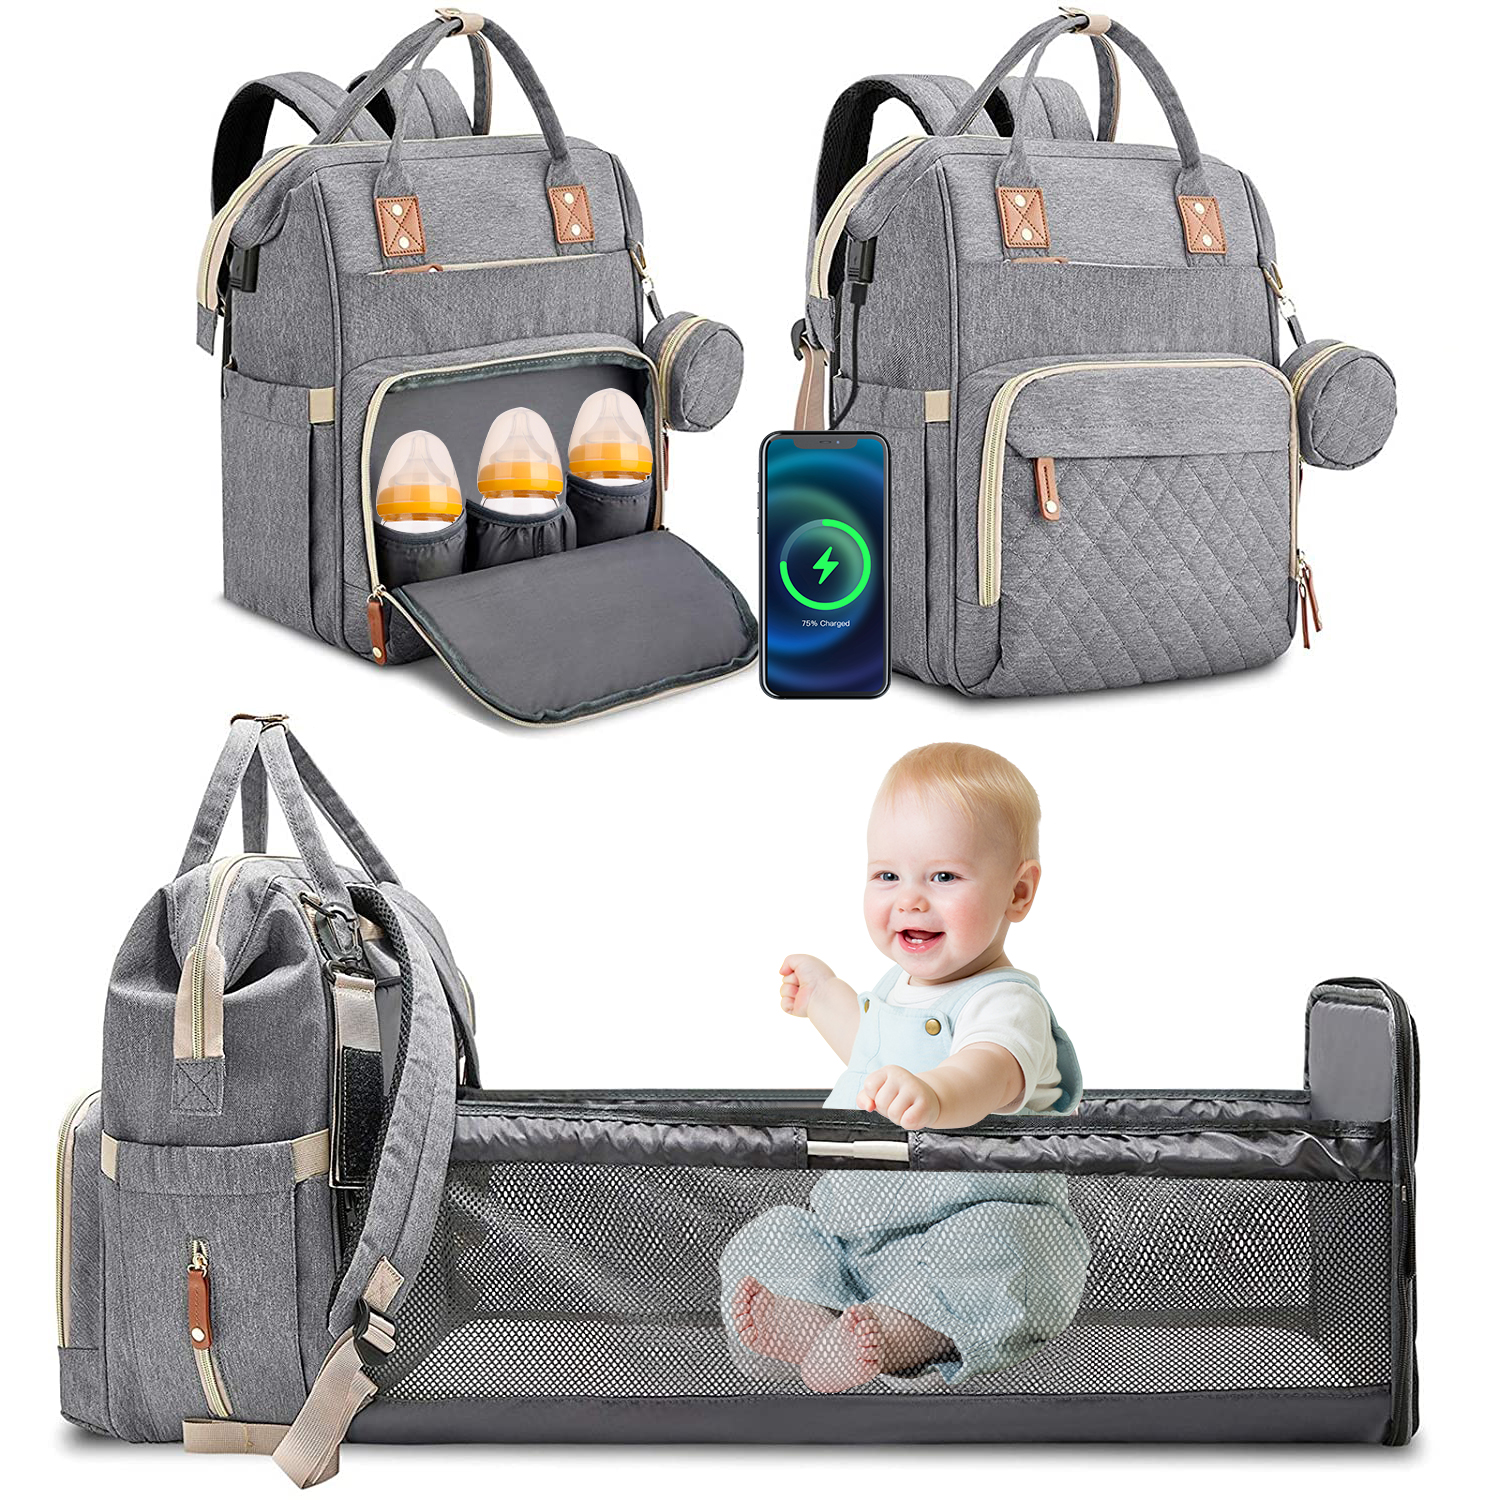 WiseWater Diaper Bag Backpack with Changing Station, USB Charging Port ...